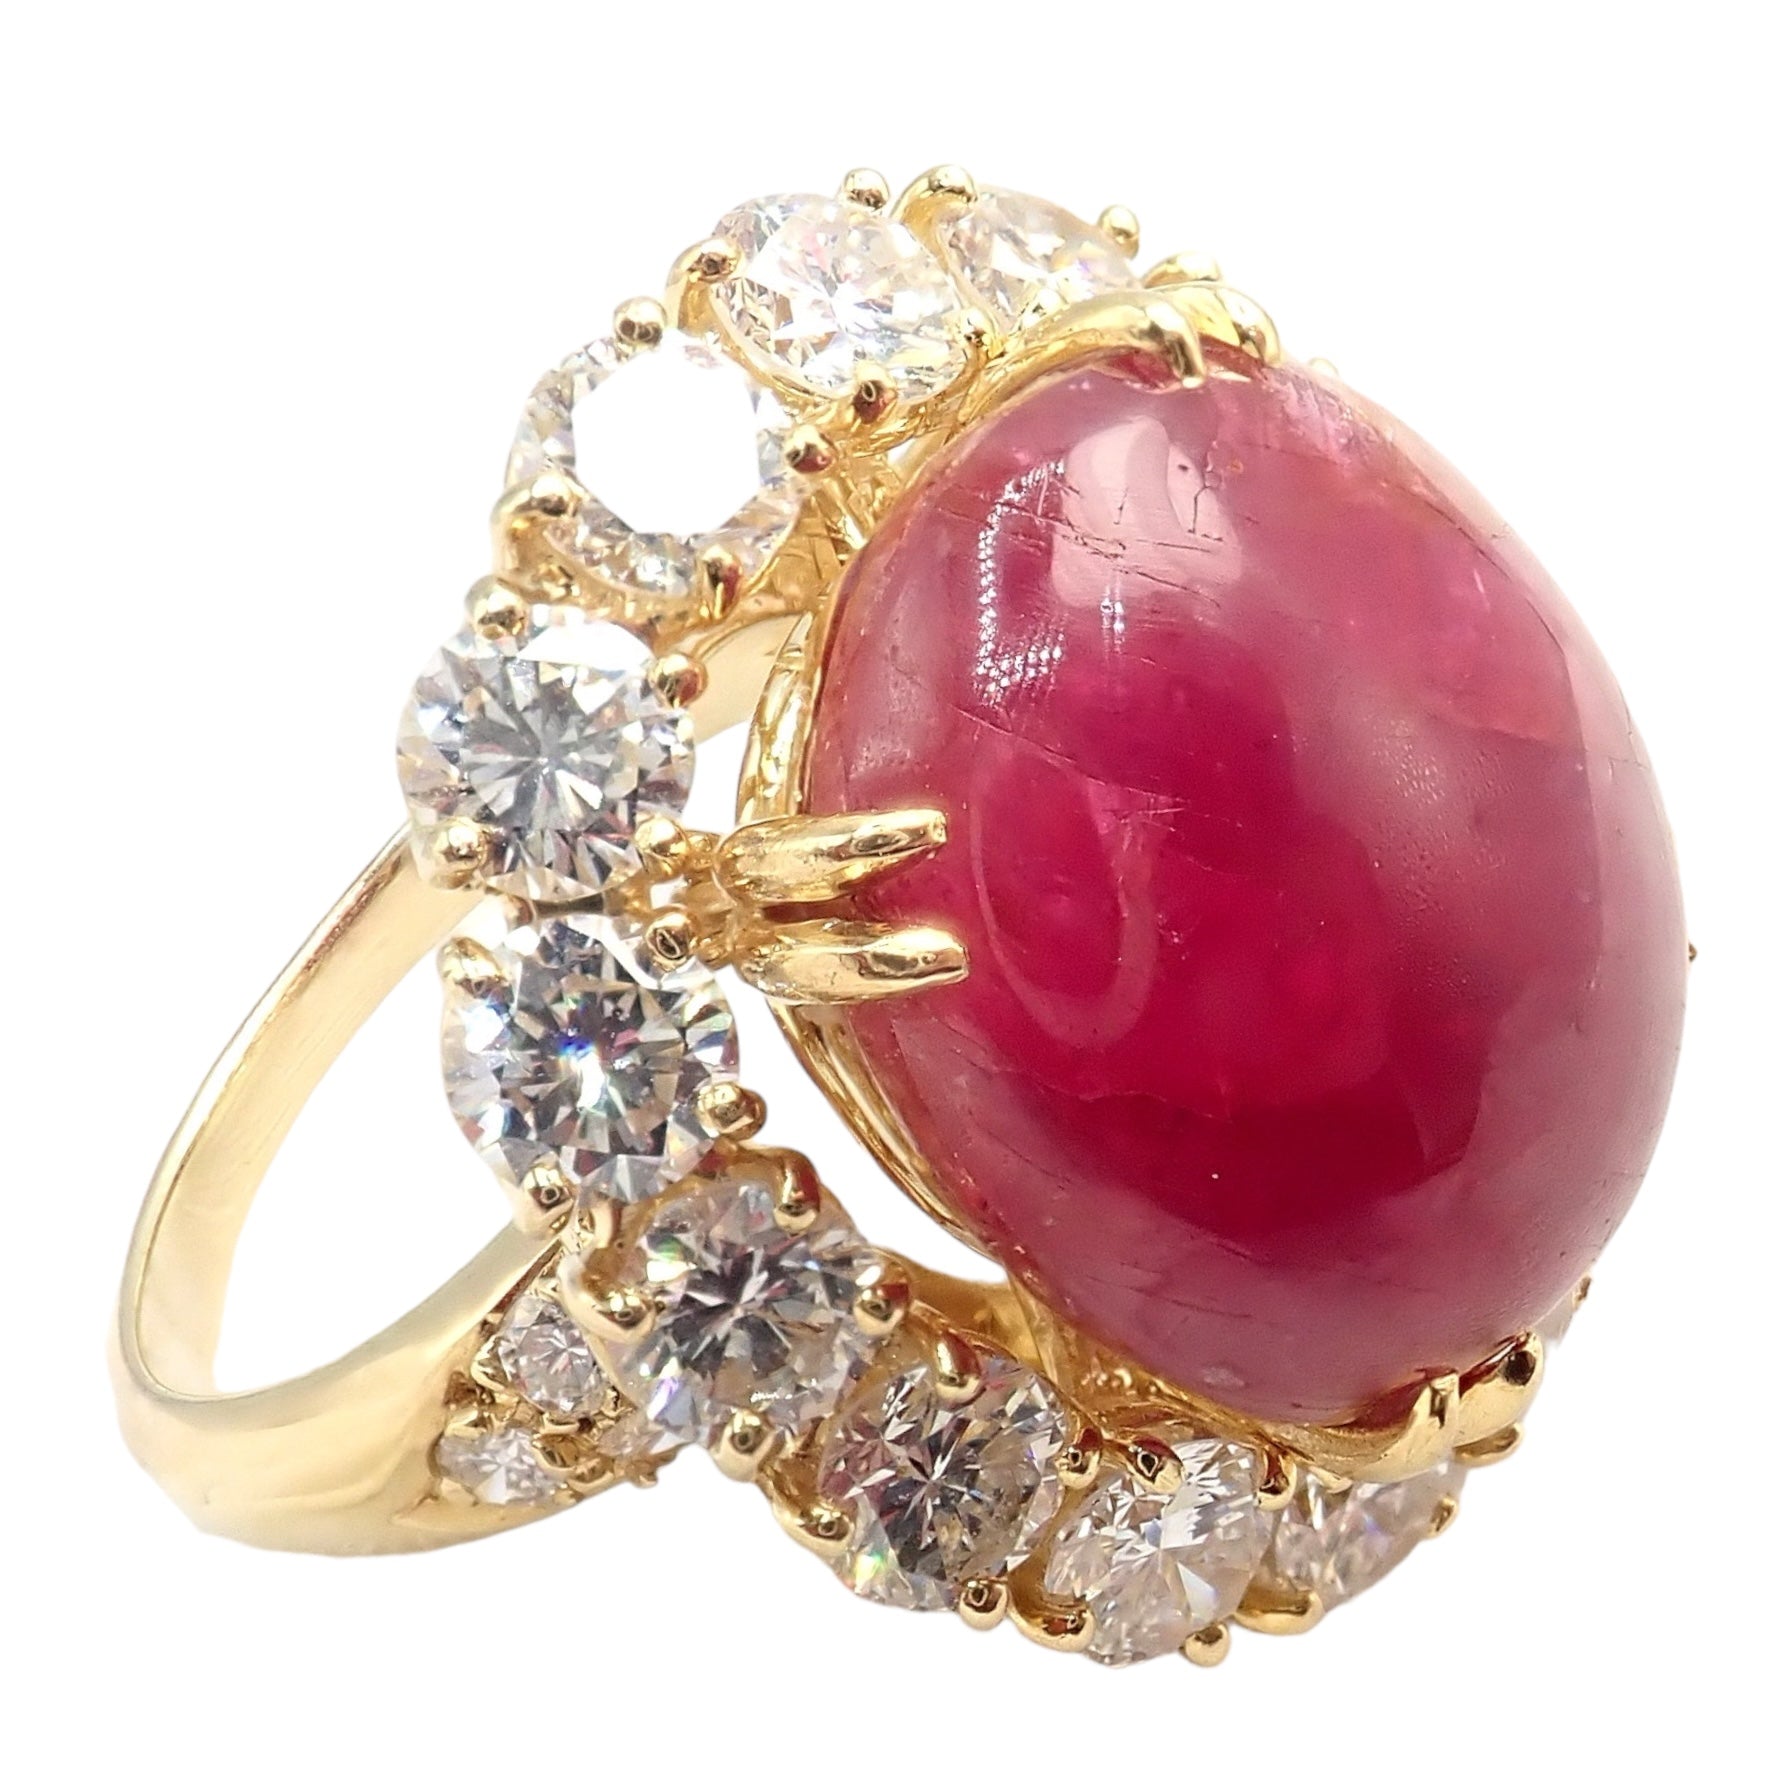 Van Cleef & Arpels Jewelry & Watches:Fine Jewelry:Rings Authentic! Van Cleef & Arpels 18k Yellow Gold Large Cabochon Ruby Diamond Ring